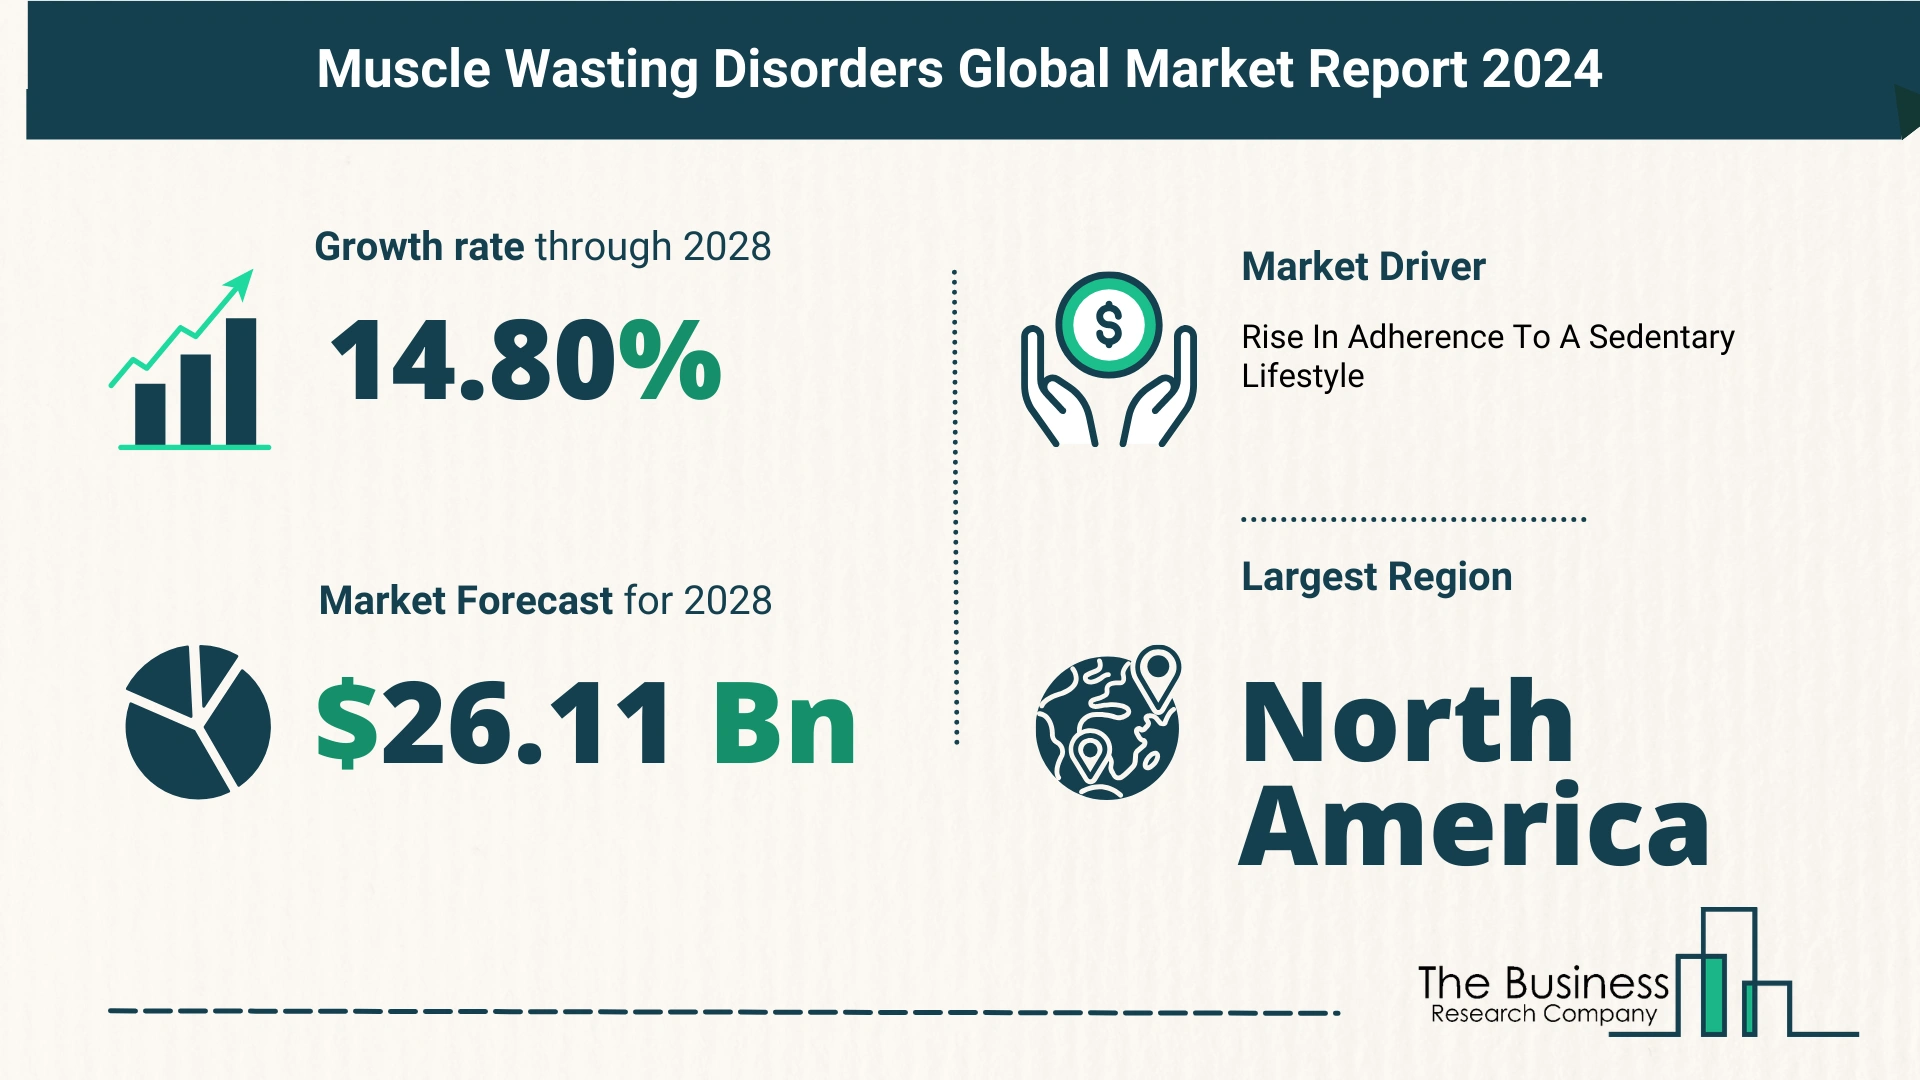 Global Muscle Wasting Disorders Market